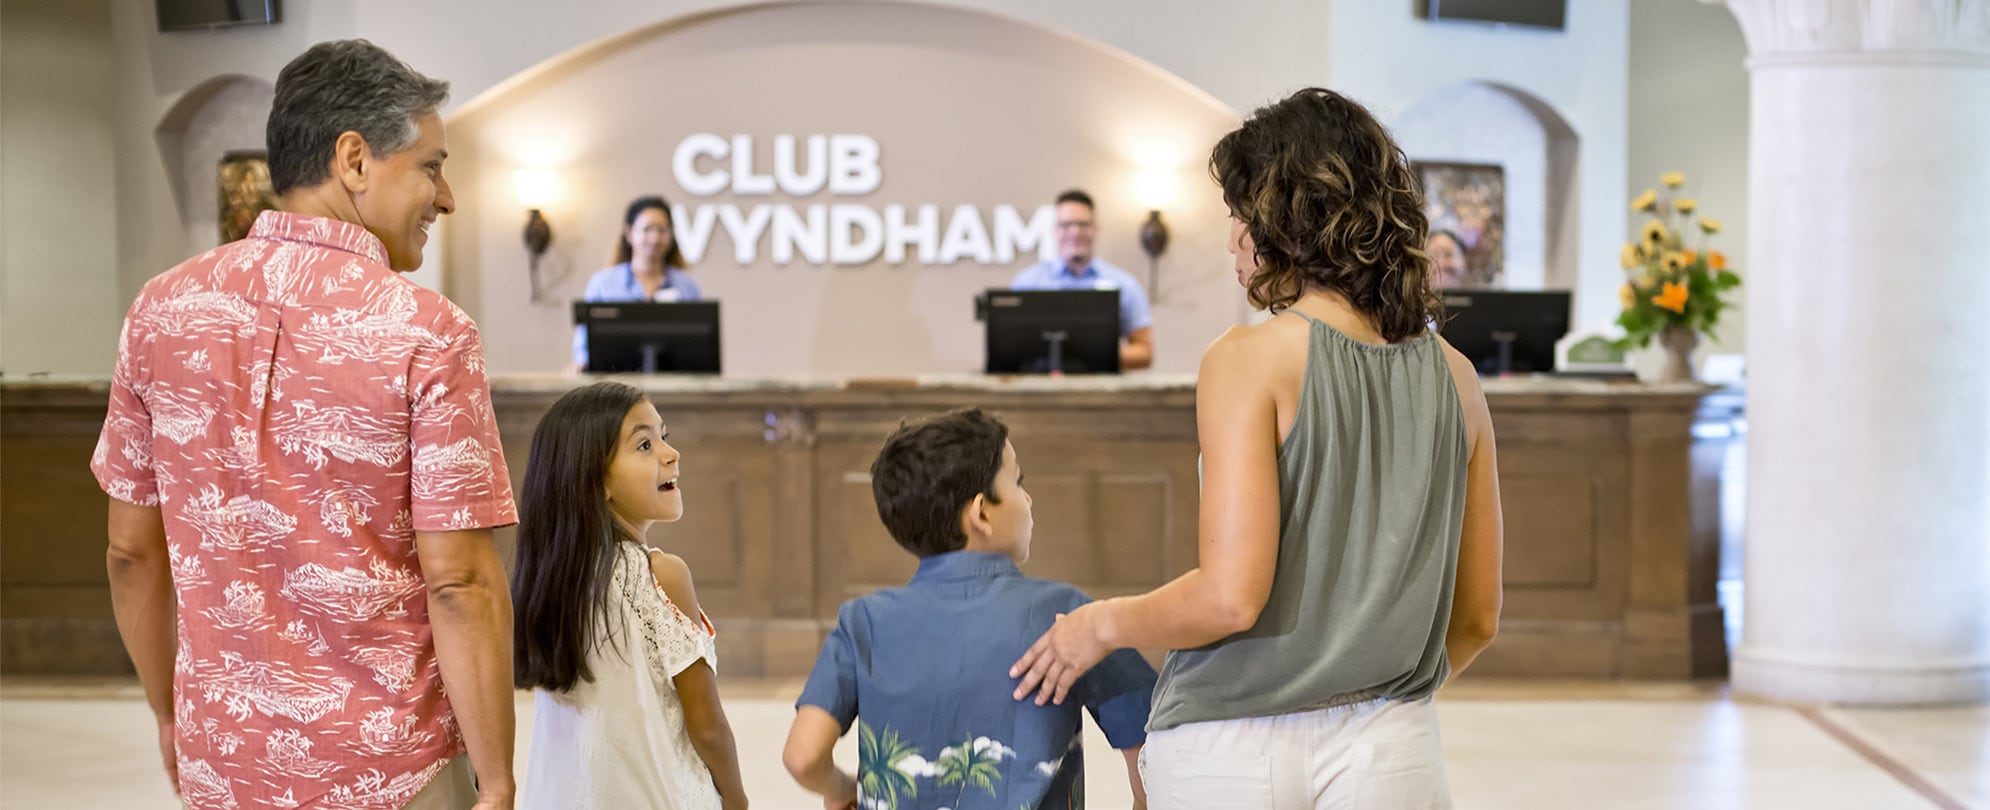 An excited family of four walking through the lobby towards the front desk of a Club Wyndham resort.